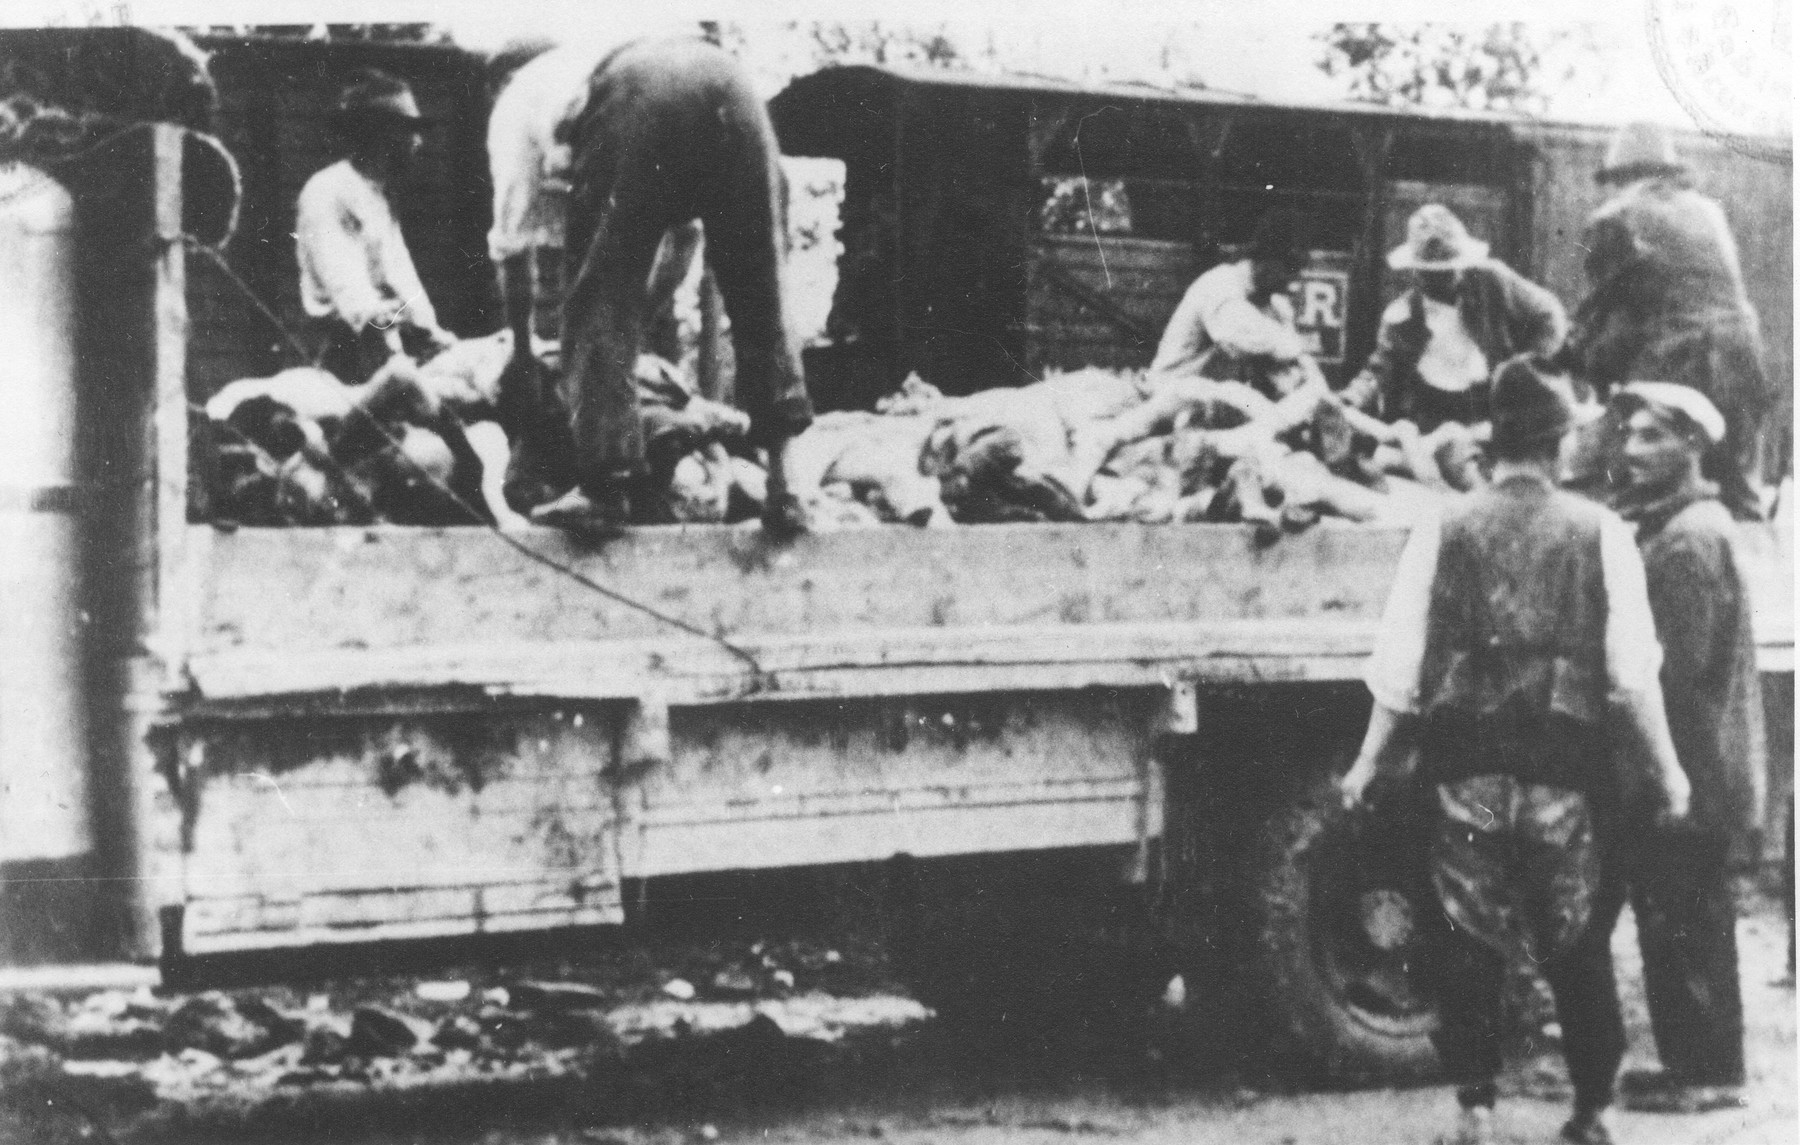 Under the supervision of Romanian guards, Romani men load the corpses of victims of the Iasi-Calarasi death onto trucks in Targu-Frumos.